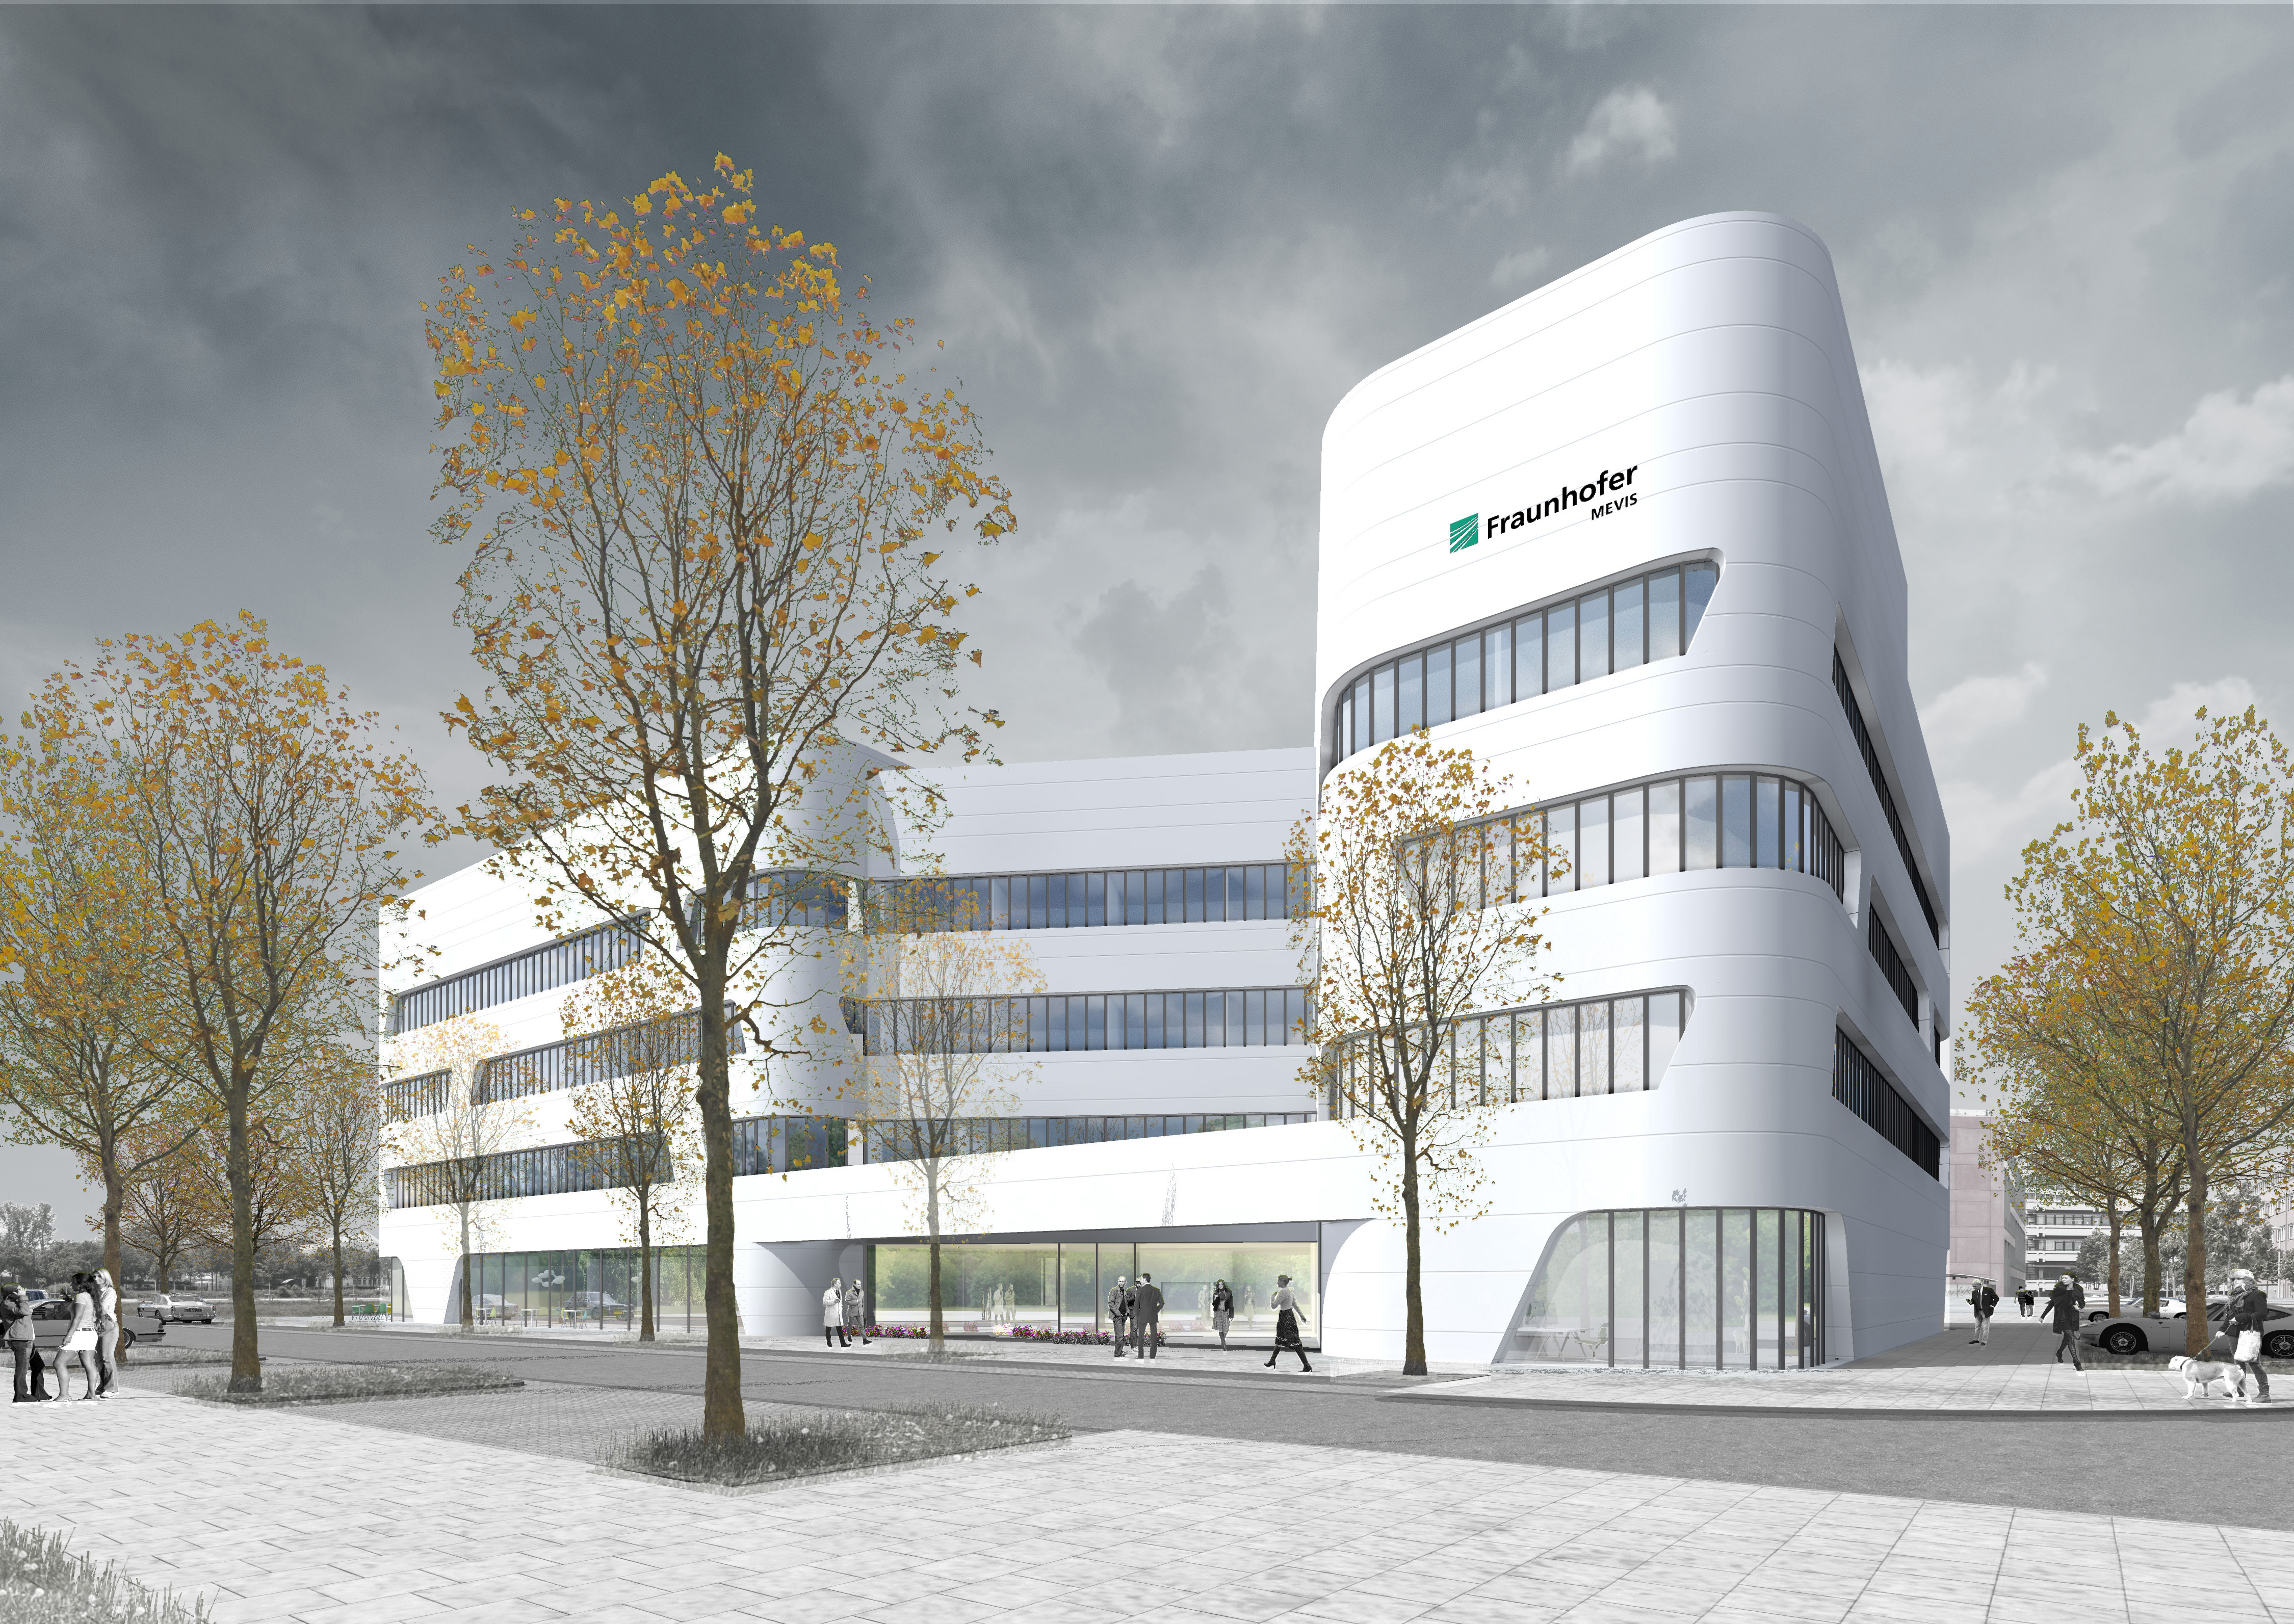 The new home of the Fraunhofer MEVIS Institute